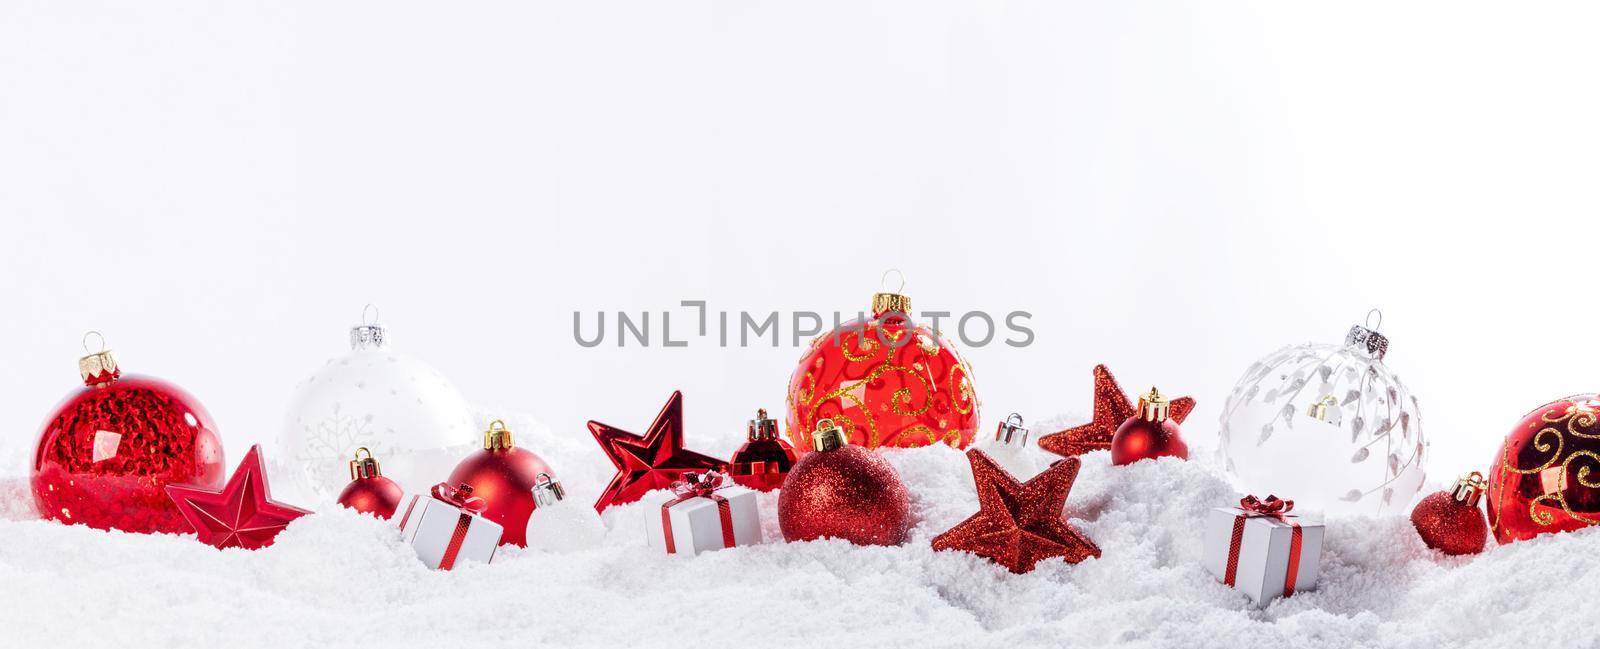 Christmas composition of red balls baubles stars on snow isolated on white background border frame design element